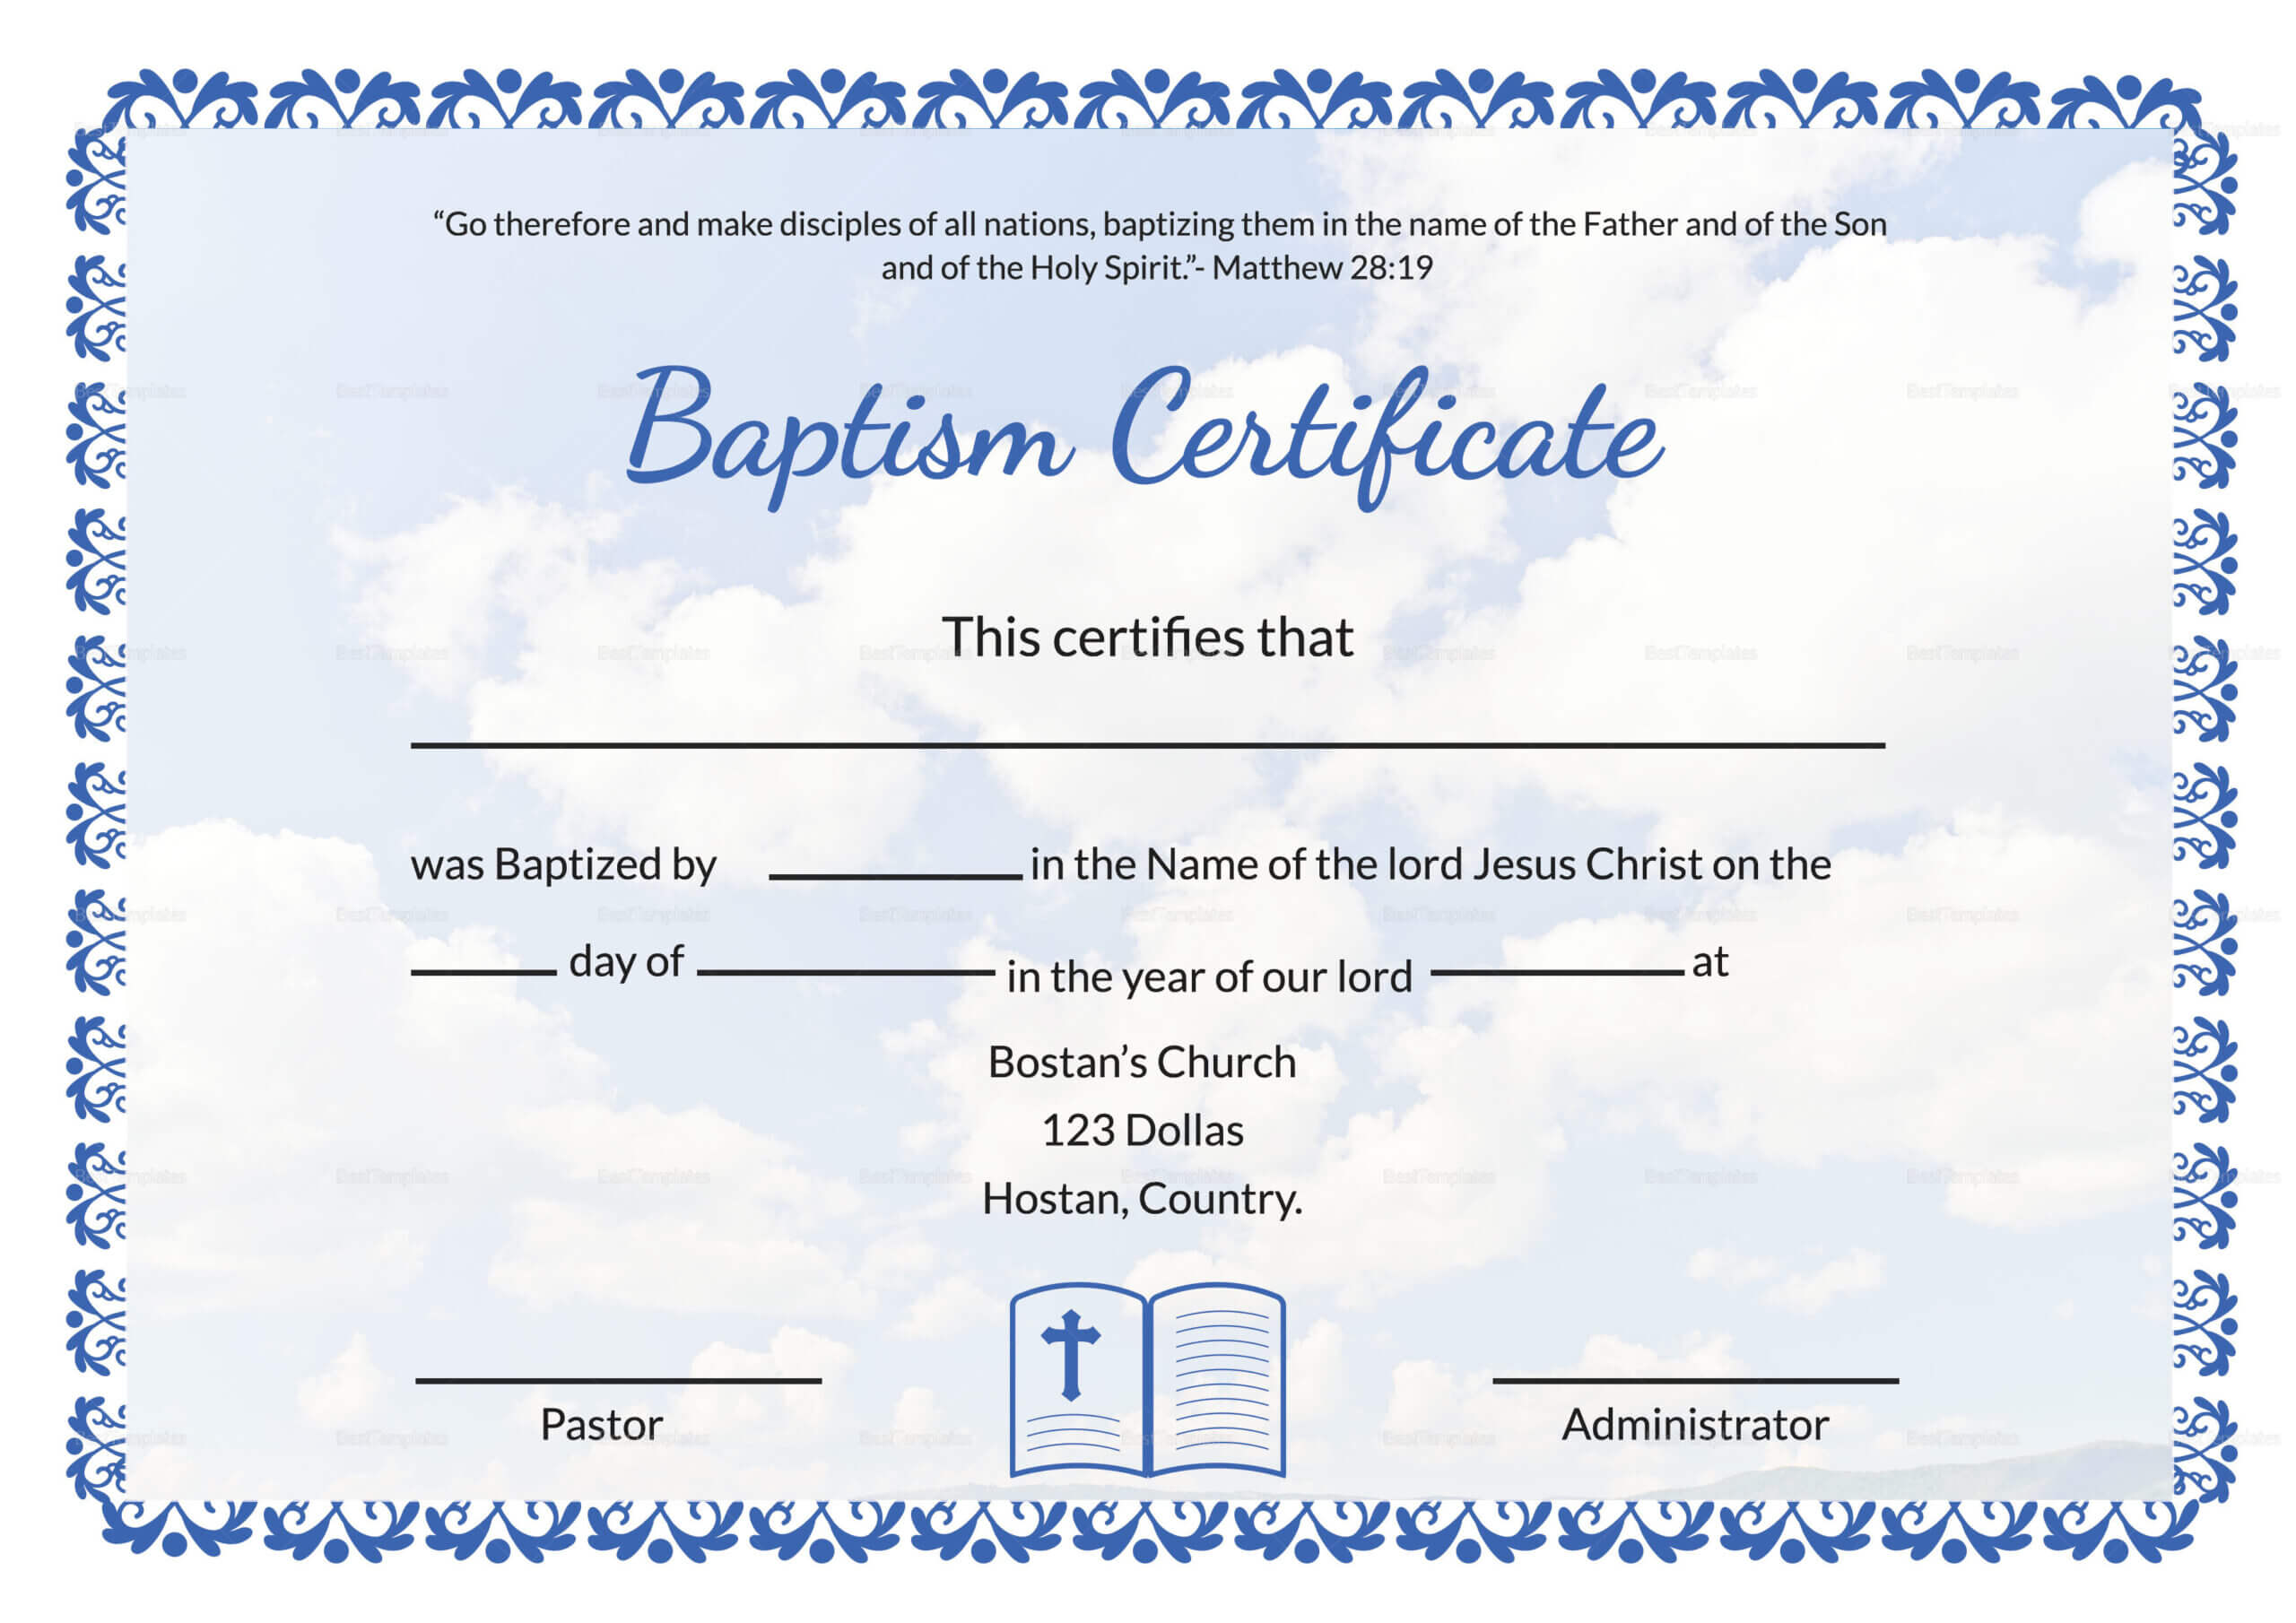 007 Certificate Of Baptism Template Ideas Unique Broadman Intended For Christian Baptism Certificate Template